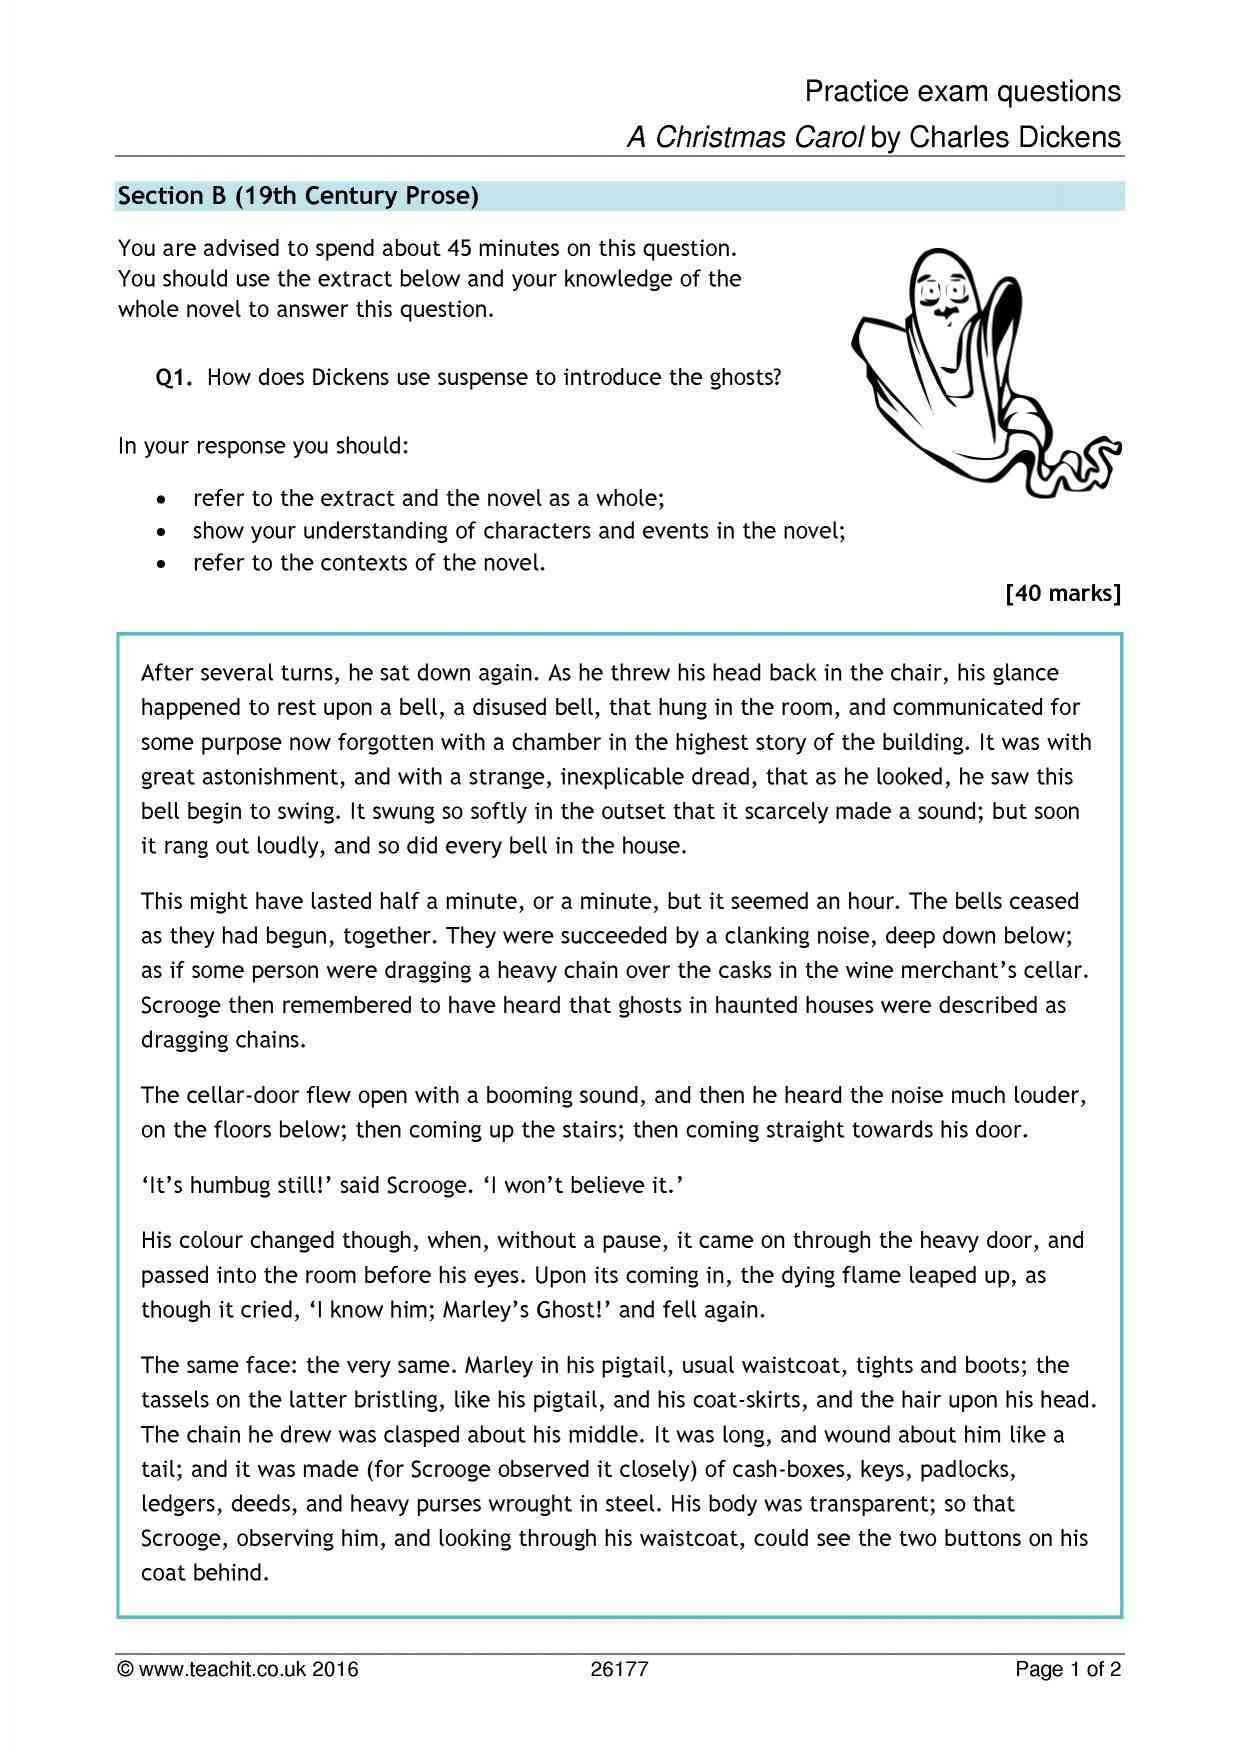 Grammar Punctuation Worksheets Along with Much and Many Worksheets Elegant 78 Best English Grammar